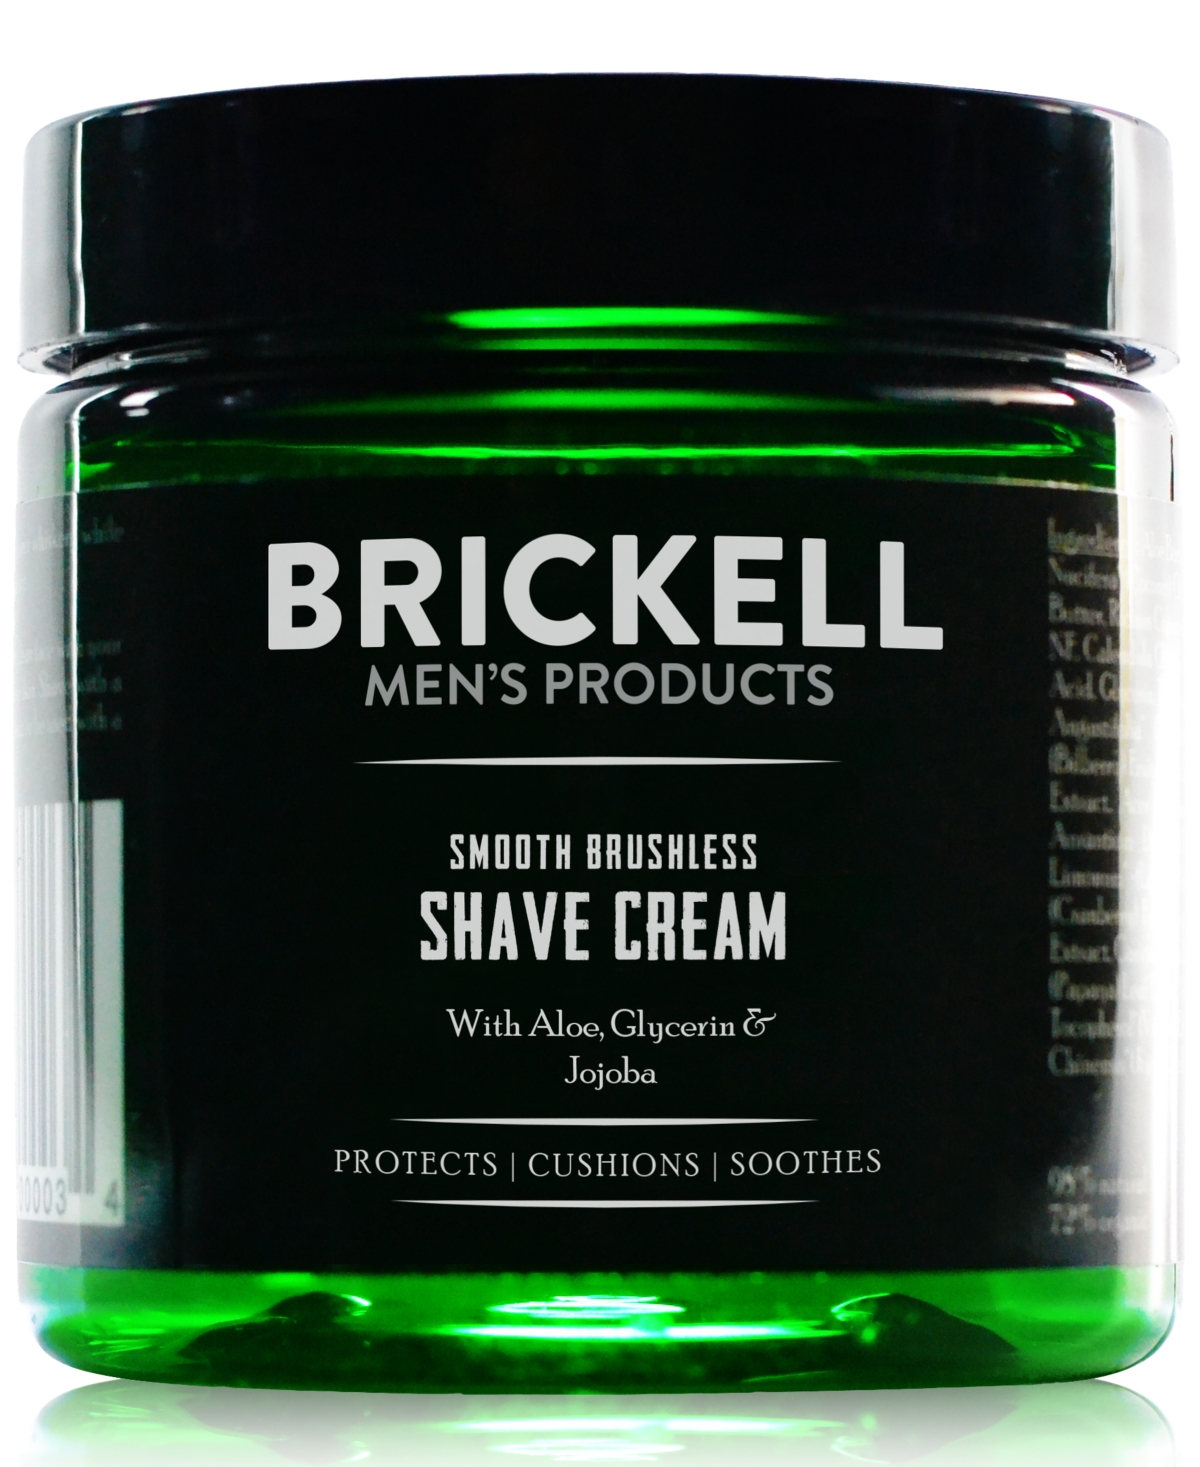 Brickell Mens Products Brickell Men's Products Smooth Brushless Shave Cream, 5 Oz.